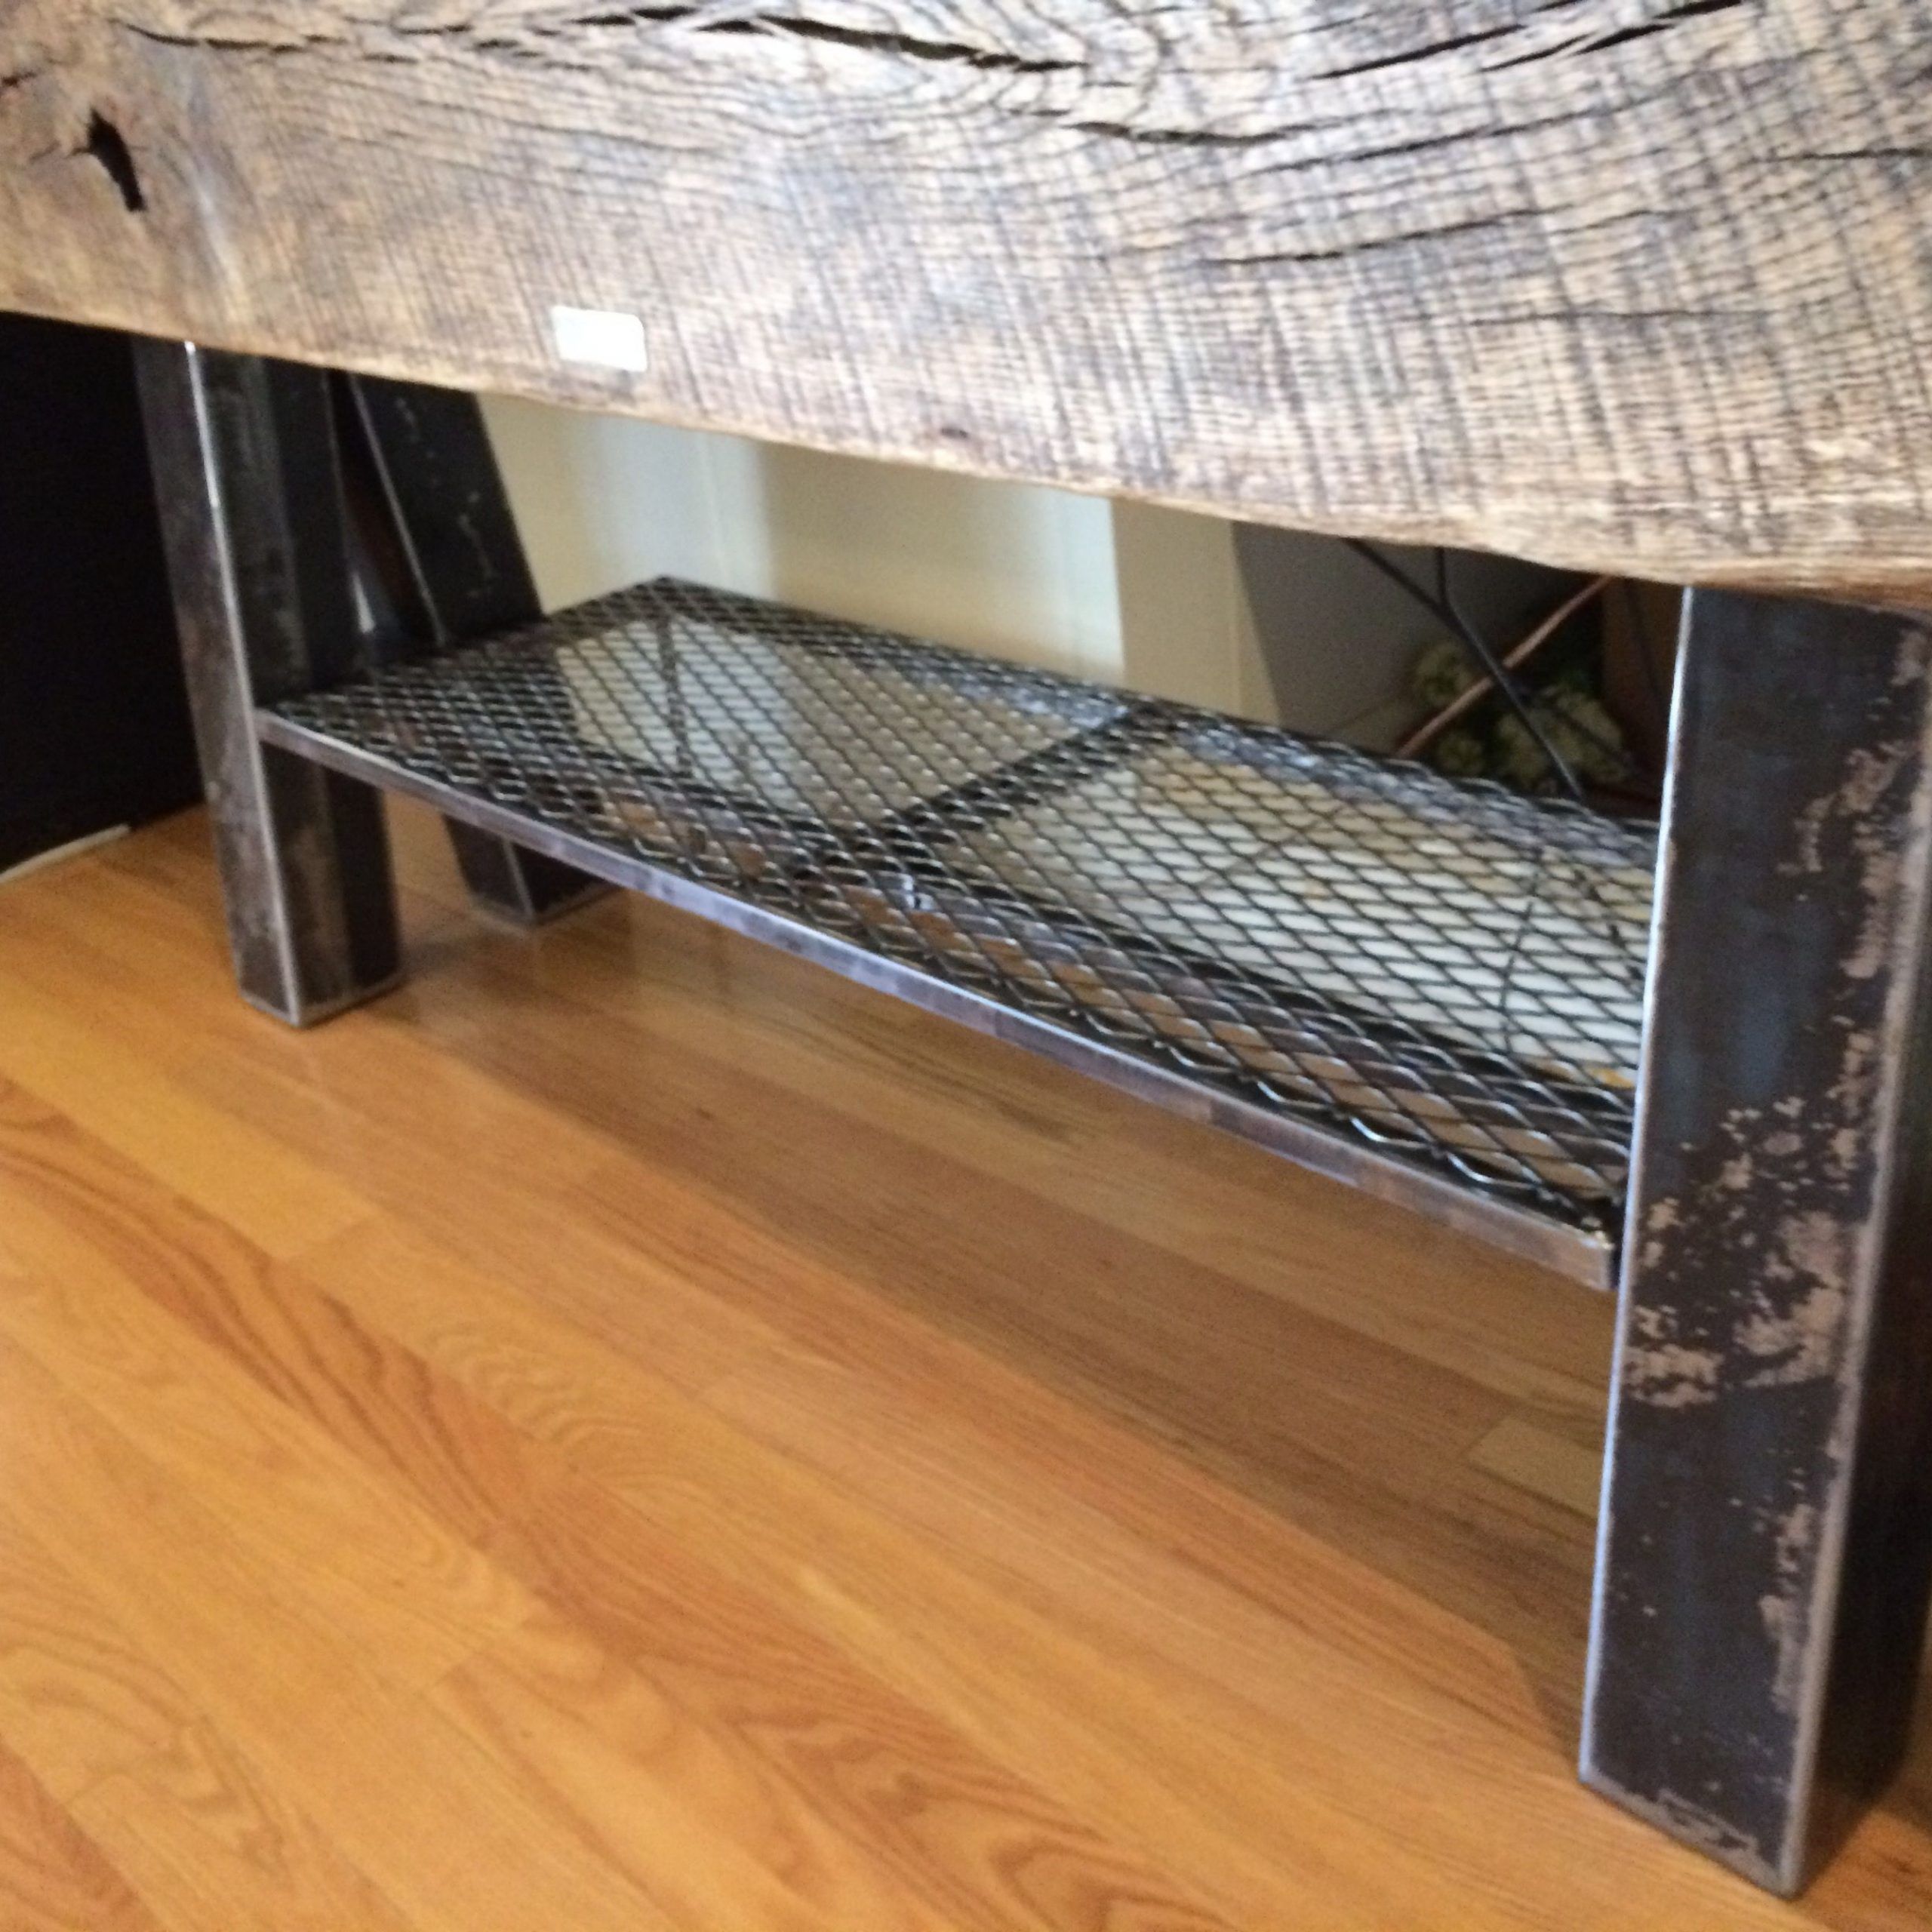 Swankoriginals Reclaimed Warehouse Beam Tv Stand With Intended For Beam Through Tv Stand (View 5 of 15)